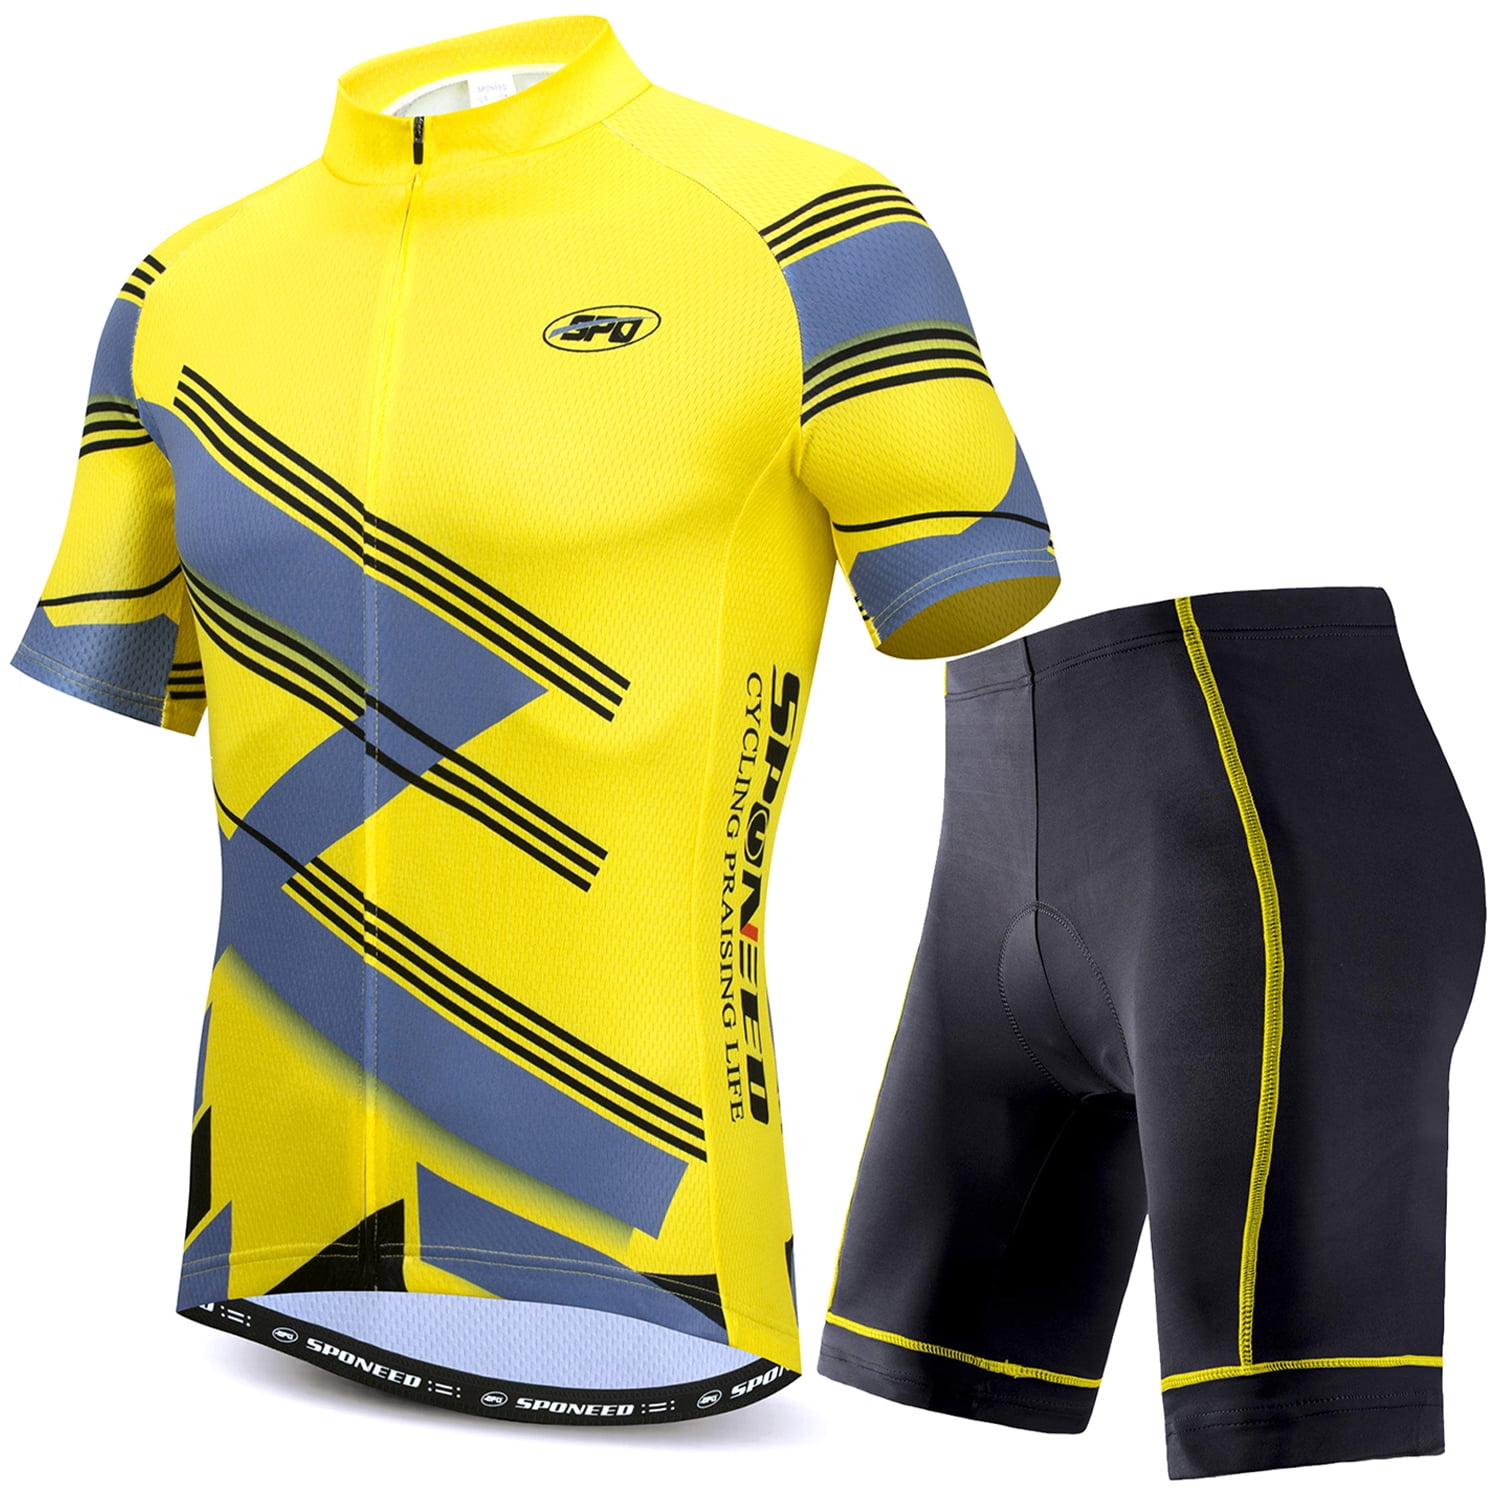 Bicycle Jersey Pants Sets Mens Sponeed Pro Biking Tight Wear Uniforms Breathable 